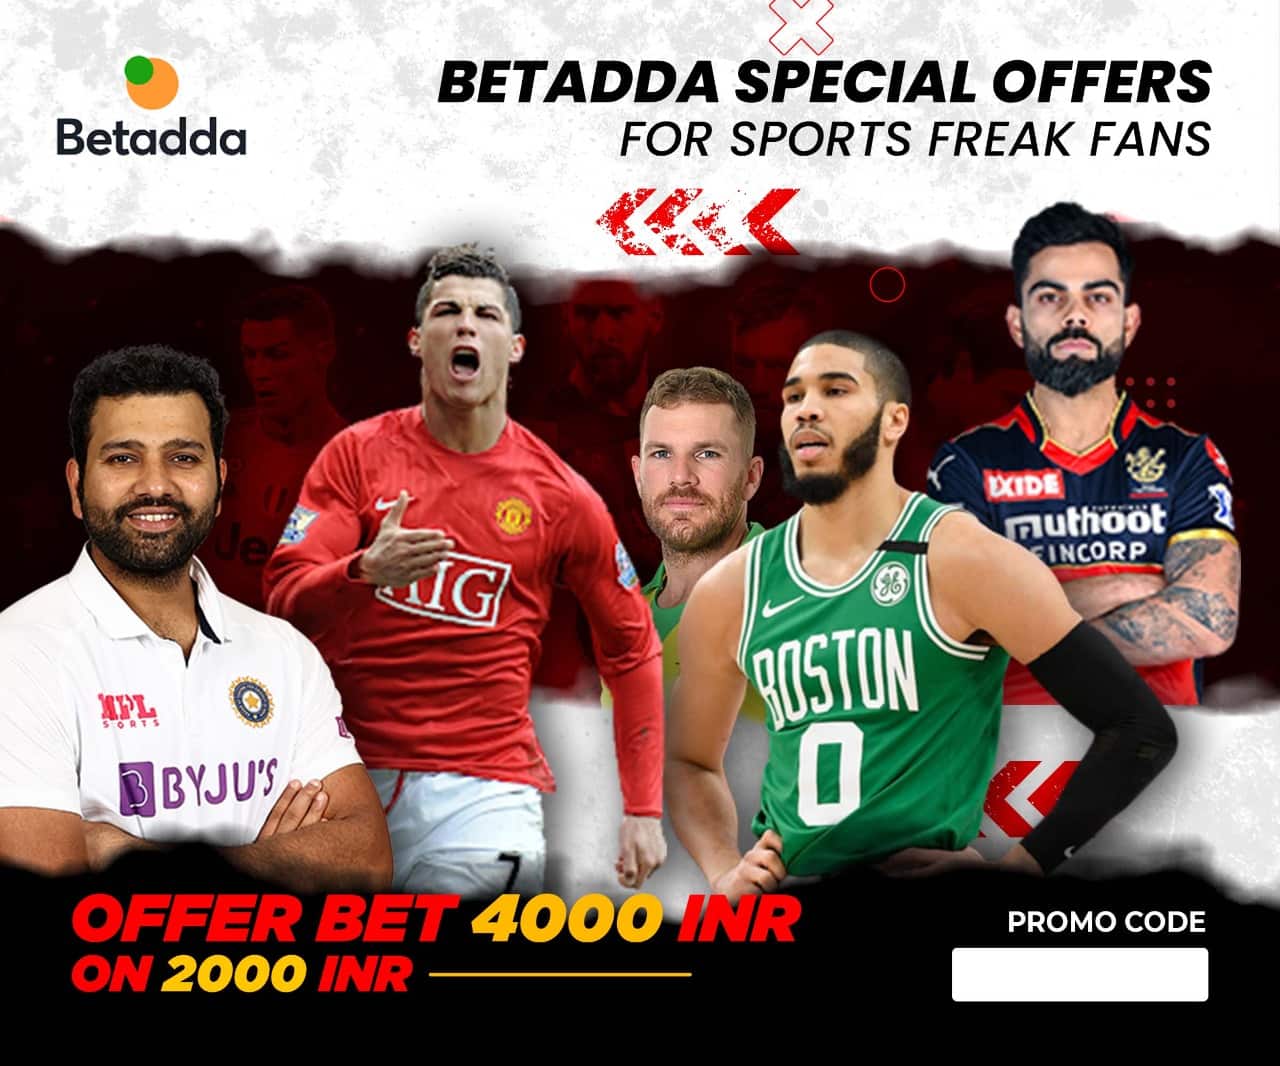 Beadda's Special Offers and Sports Schedule For This Week